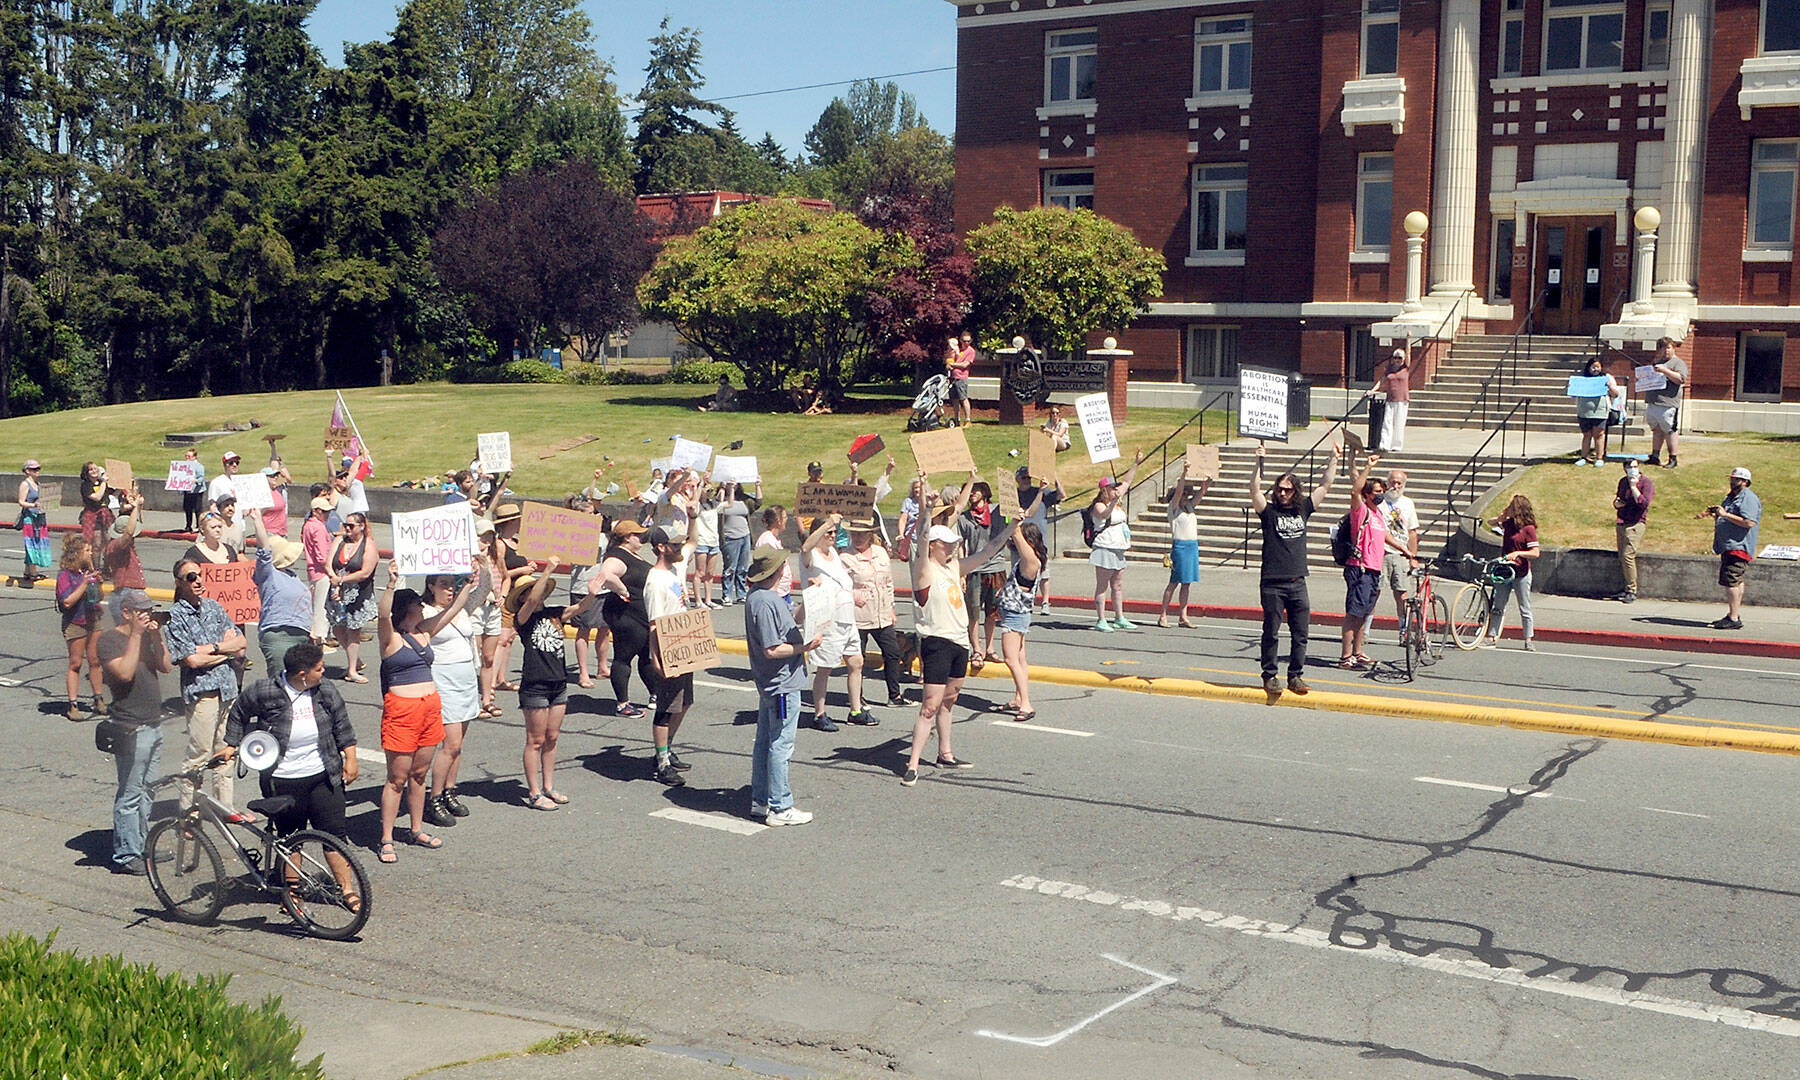 Women’s rights supporters block traffic on Lincoln Street in front of the Clallam County Courthouse for one minute symbolizing the report that every minute, a woman dies from complications from child bearing. (Keith Thorpe/Peninsula Daily News)